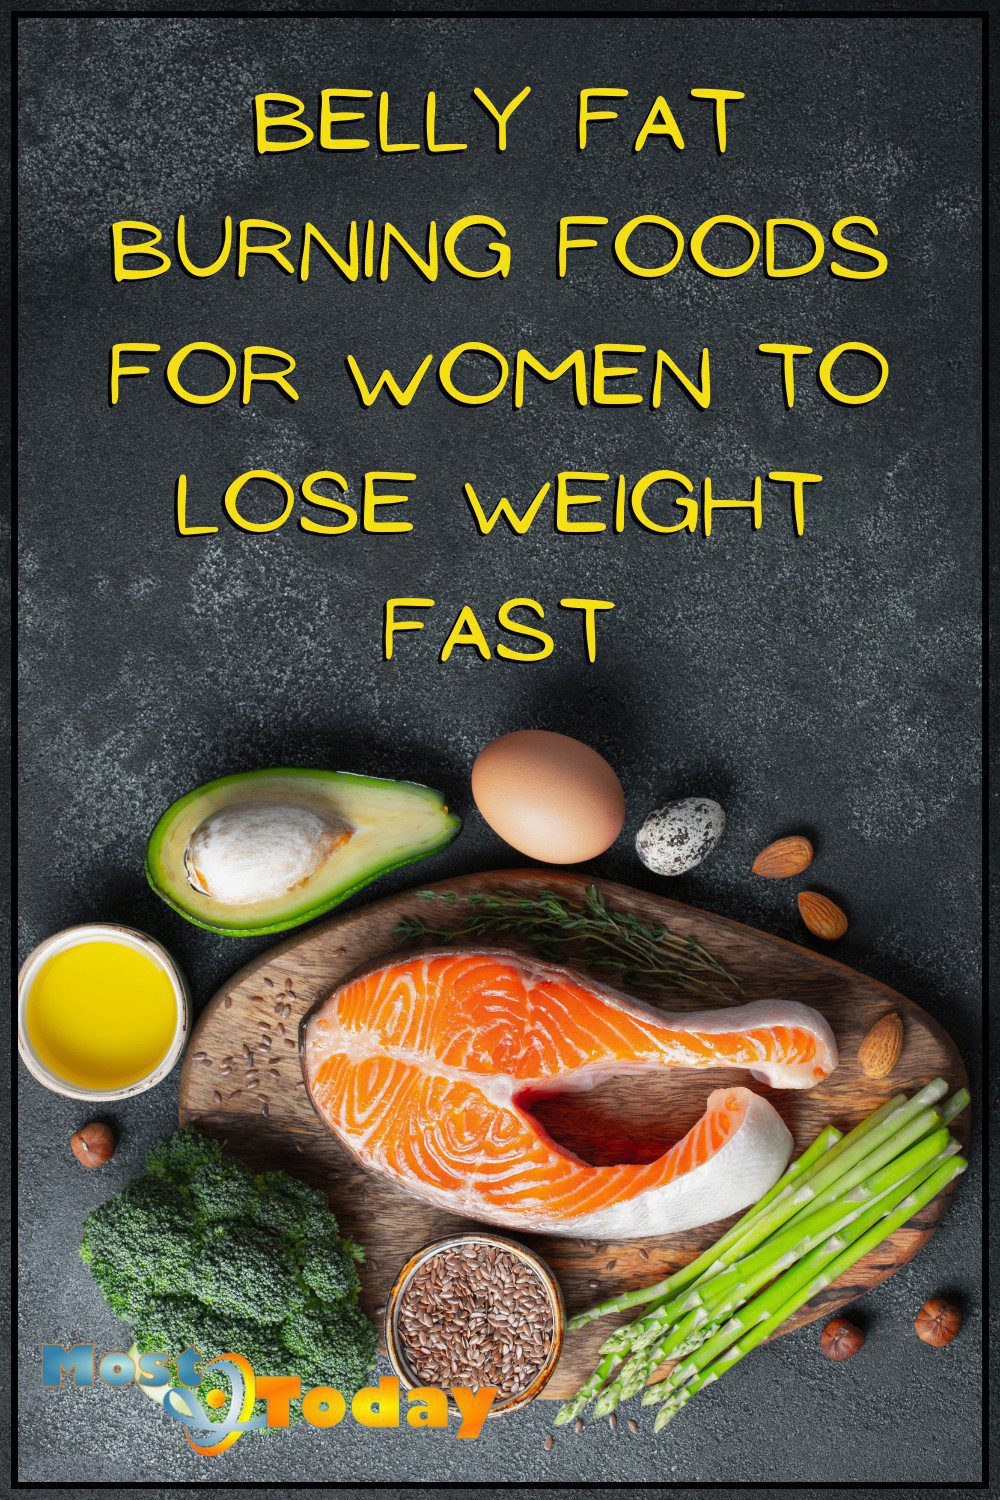 How To Weight Loss Fast With Belly Fat Burning Foods For Women